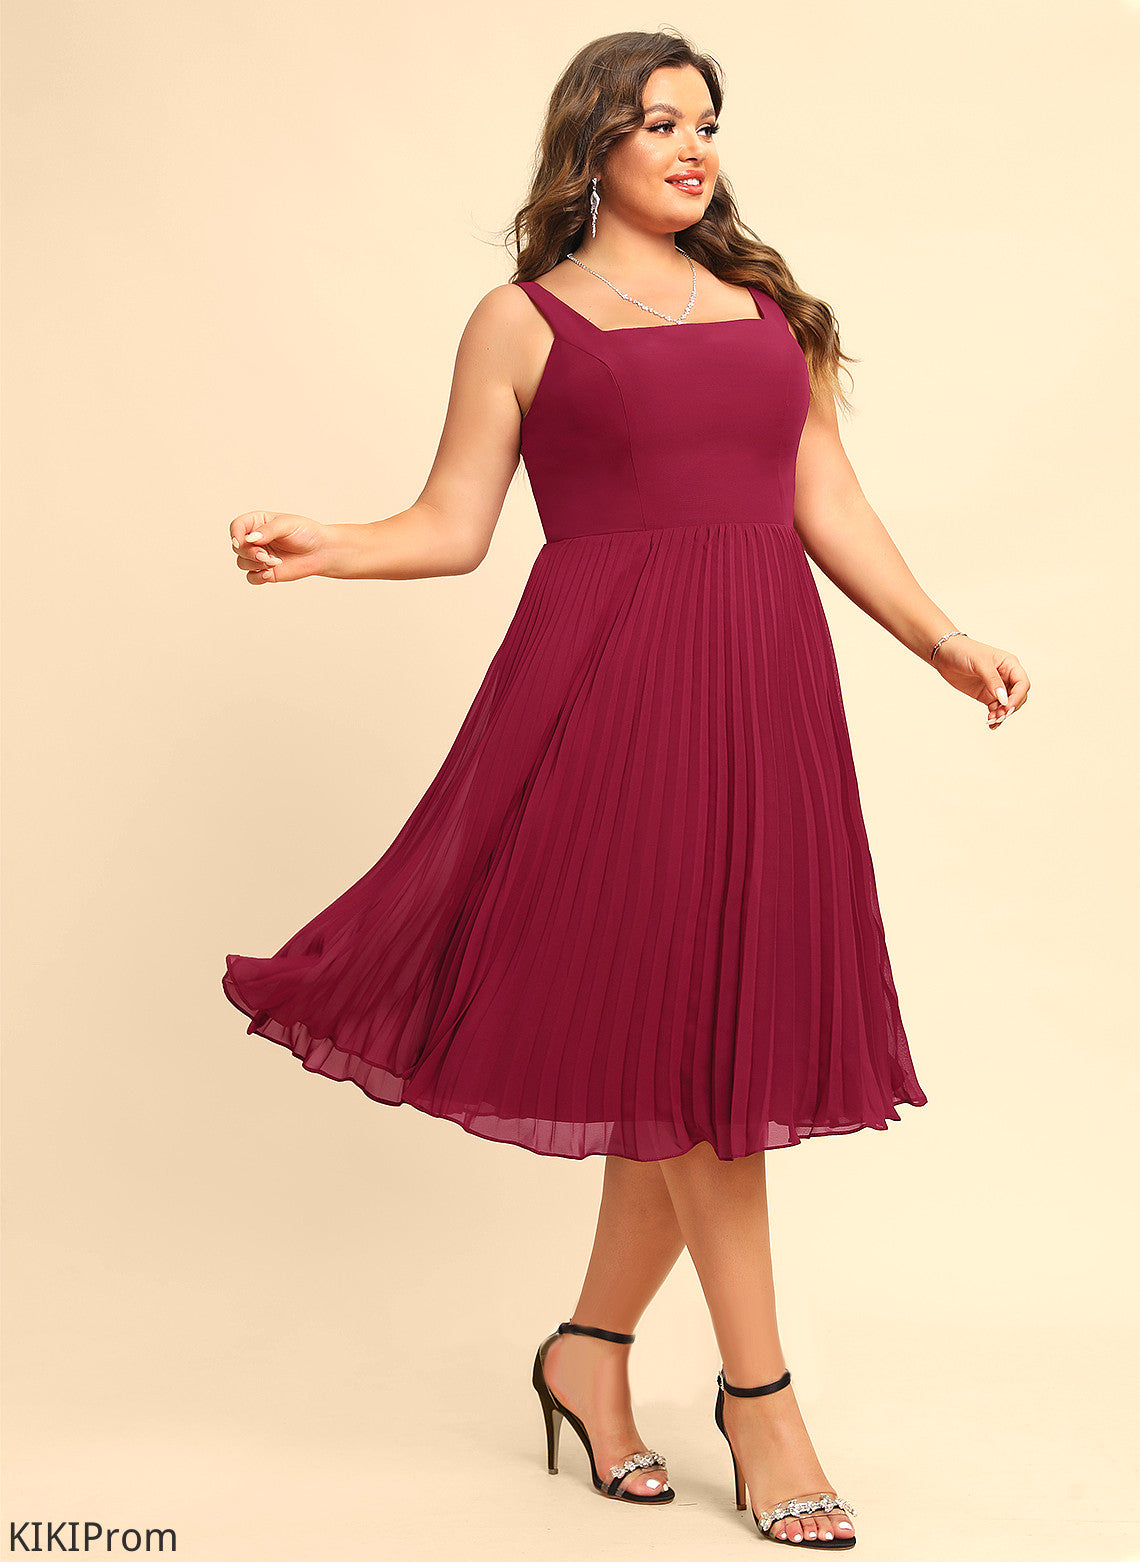 Pleated Neckline With Homecoming Dresses Chiffon Homecoming Square Knee-Length Judy Dress A-Line